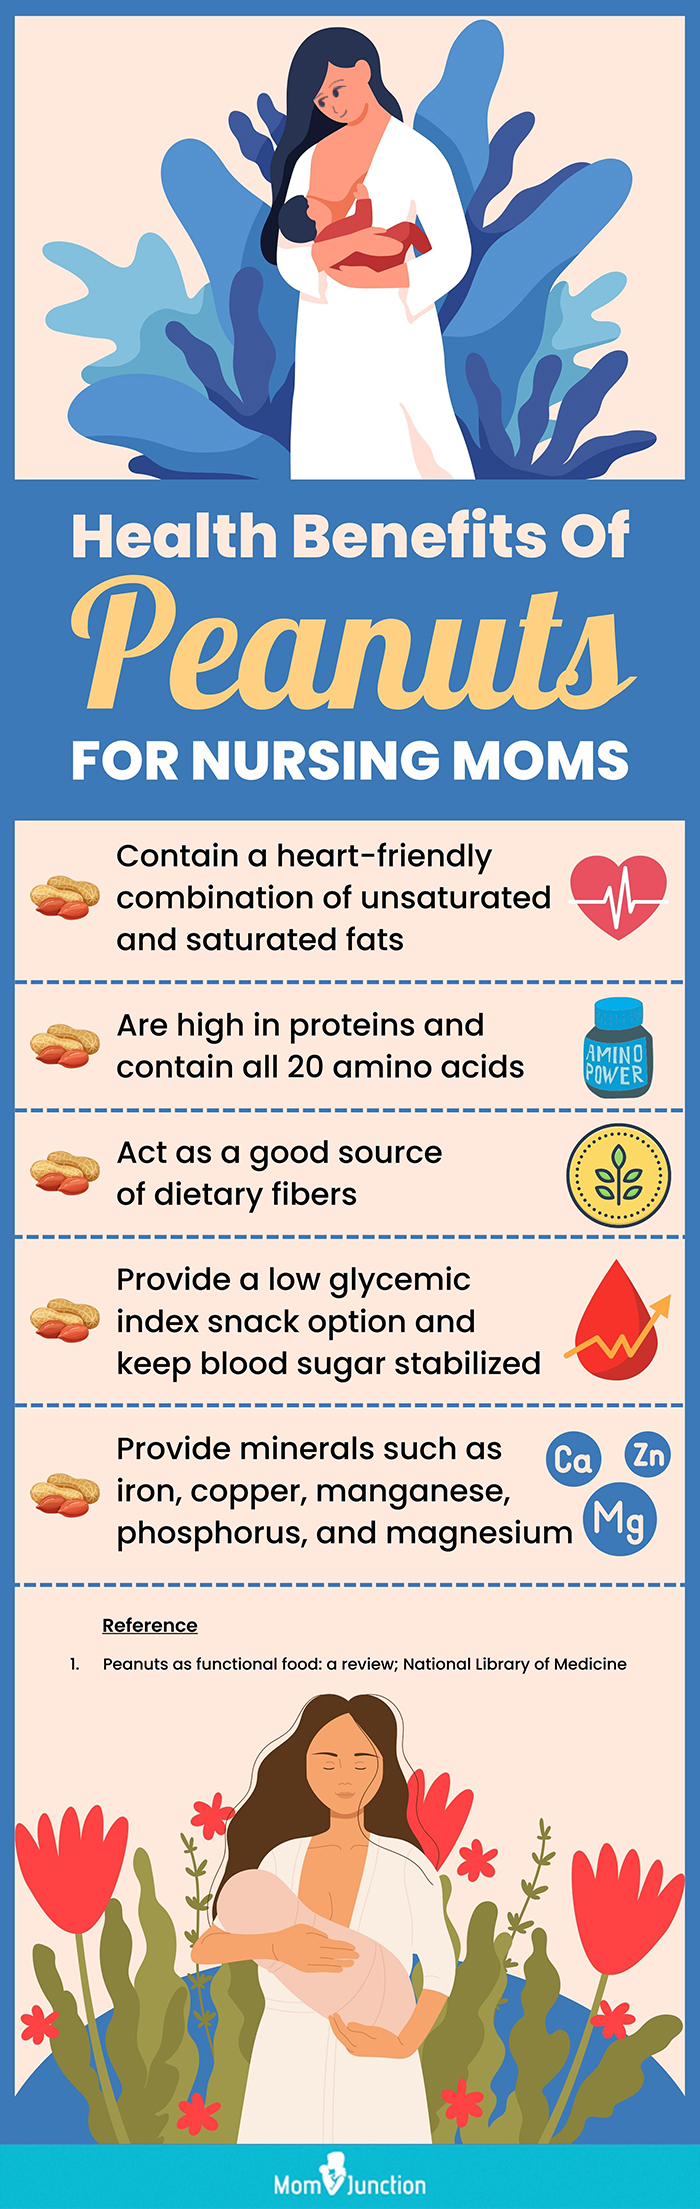 health benefits of peanuts for nursing moms (infographic)